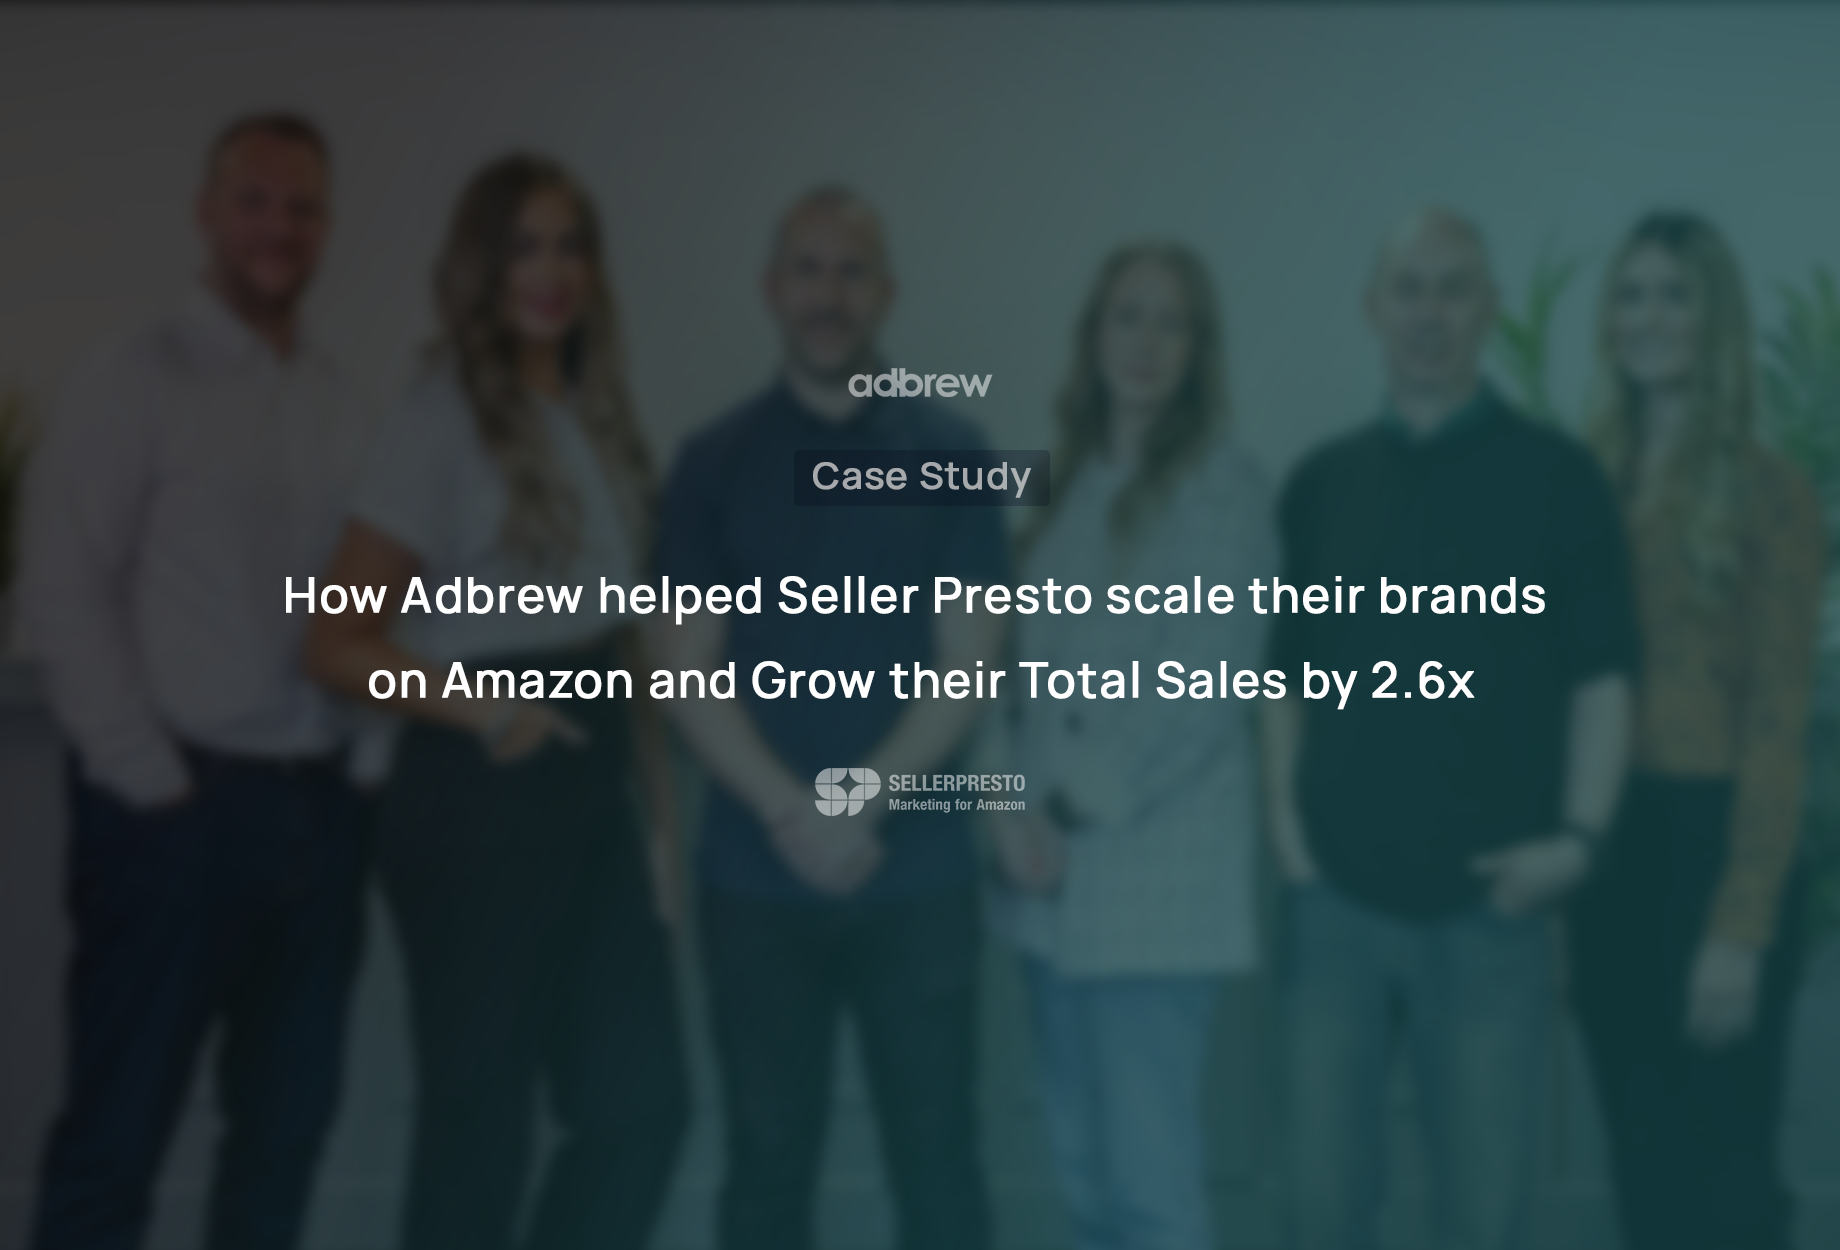 How Adbrew helped Seller Presto scale their brands on Amazon and Grow their Total Sales by 2.6x